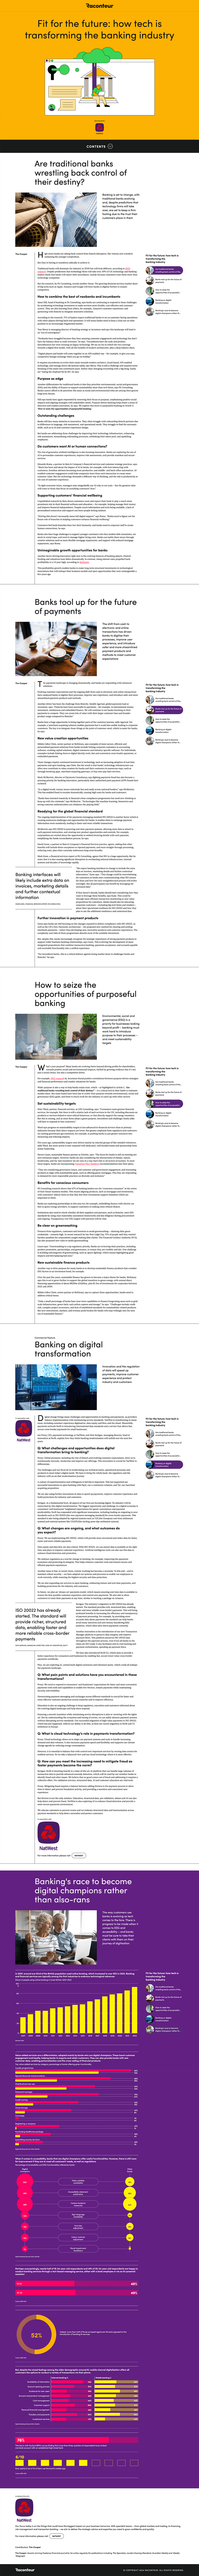 Fit for the future: How tech is transforming the banking industry